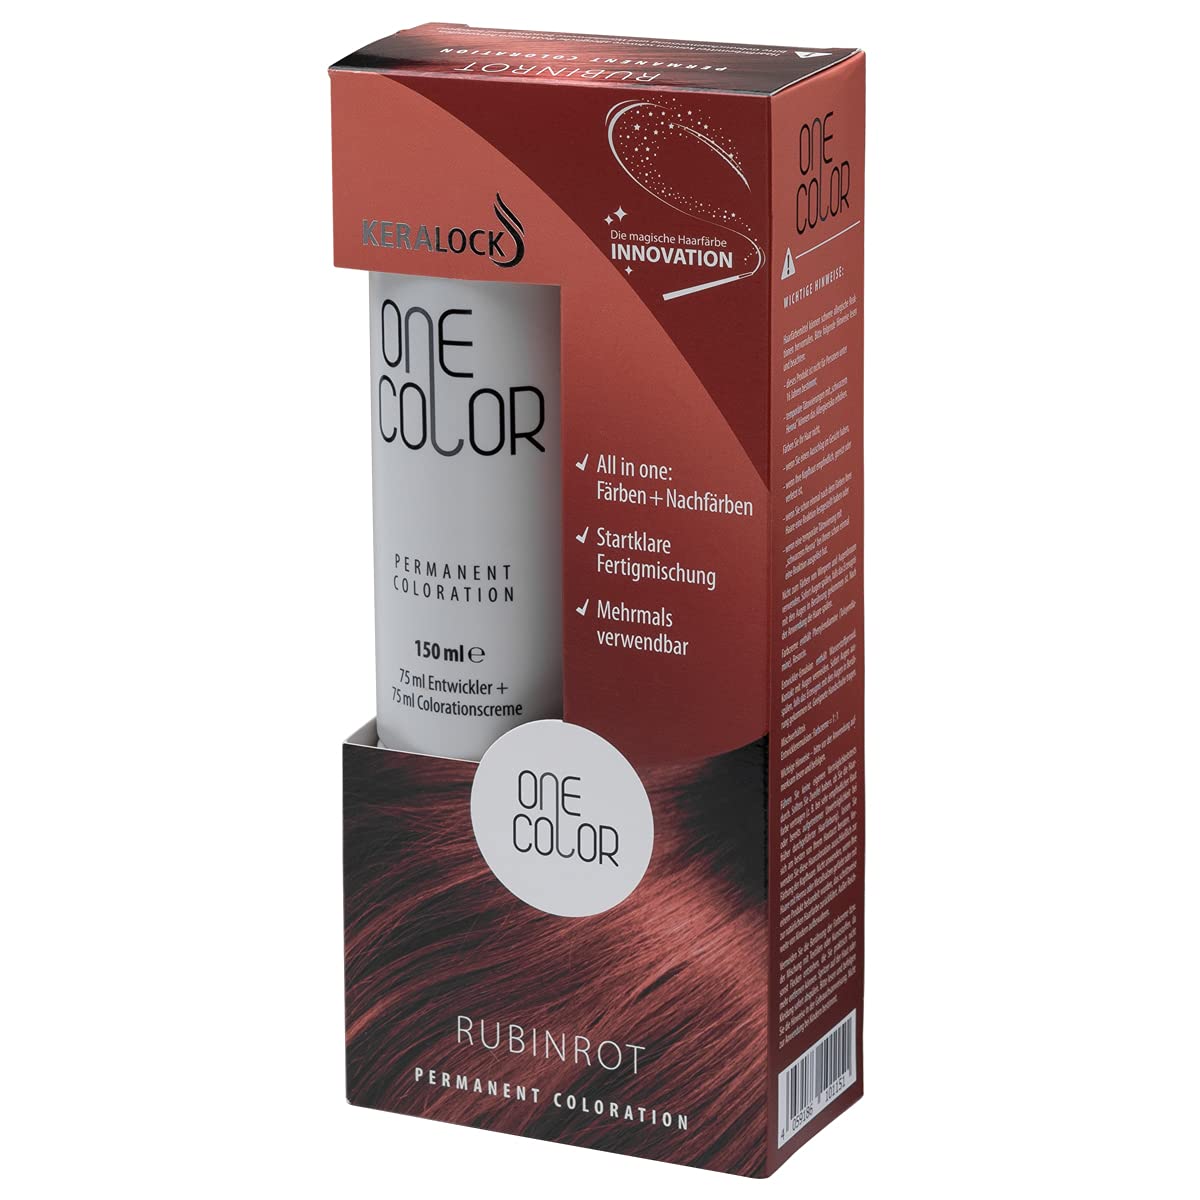 One colour by Keralock permanent colouration (ruby red), ‎ruby-red